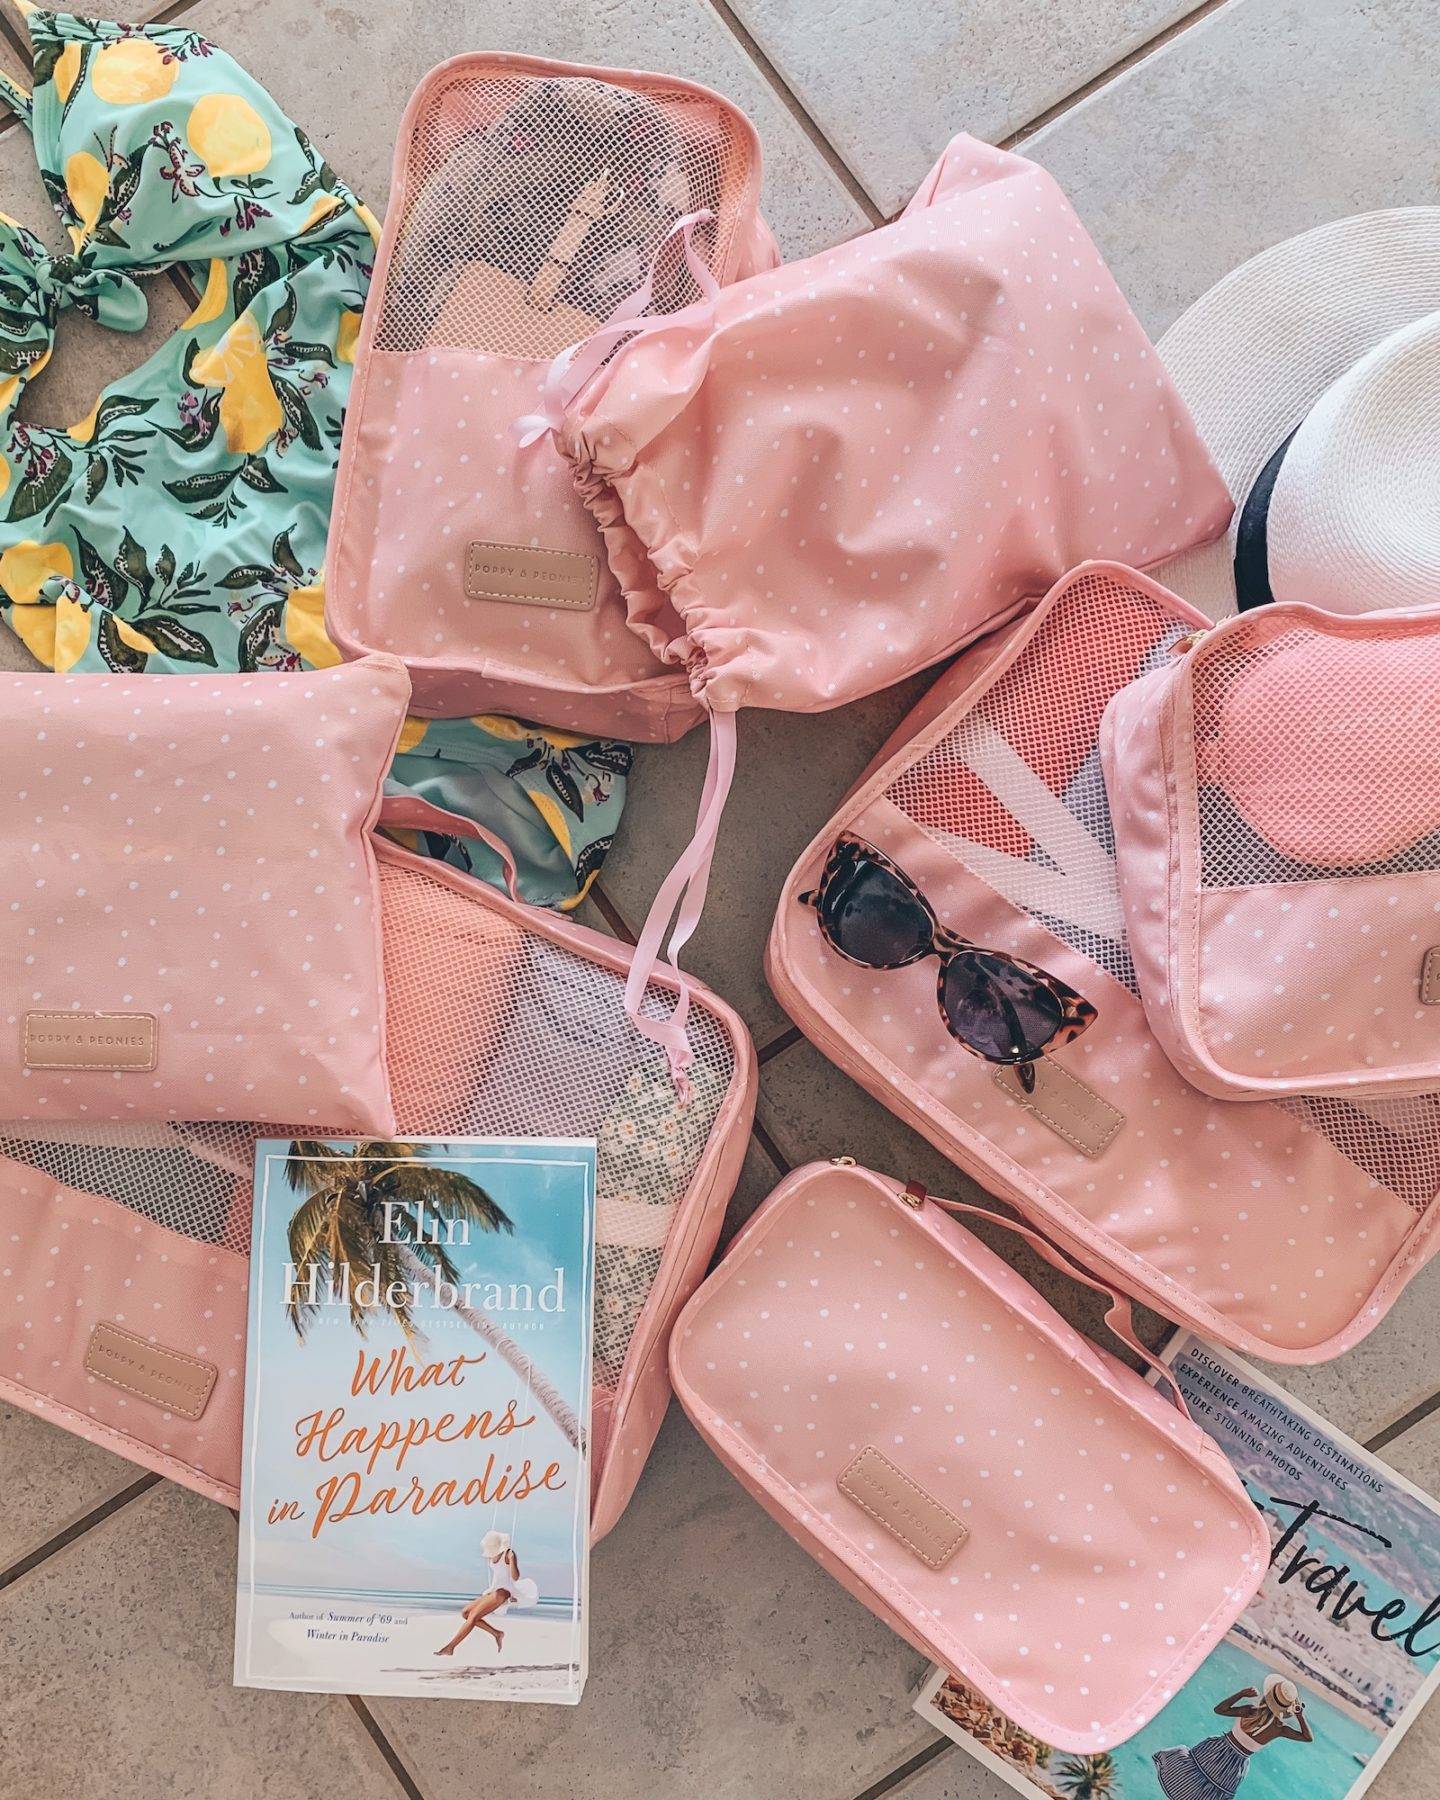 Headed for a trip to Florida and don’t know what to bring? I’ve got you covered. This post includes everything you need to pack for a trip to Florida and includes a printable packing checklist! 

Pictured here: #30 Packing cubes